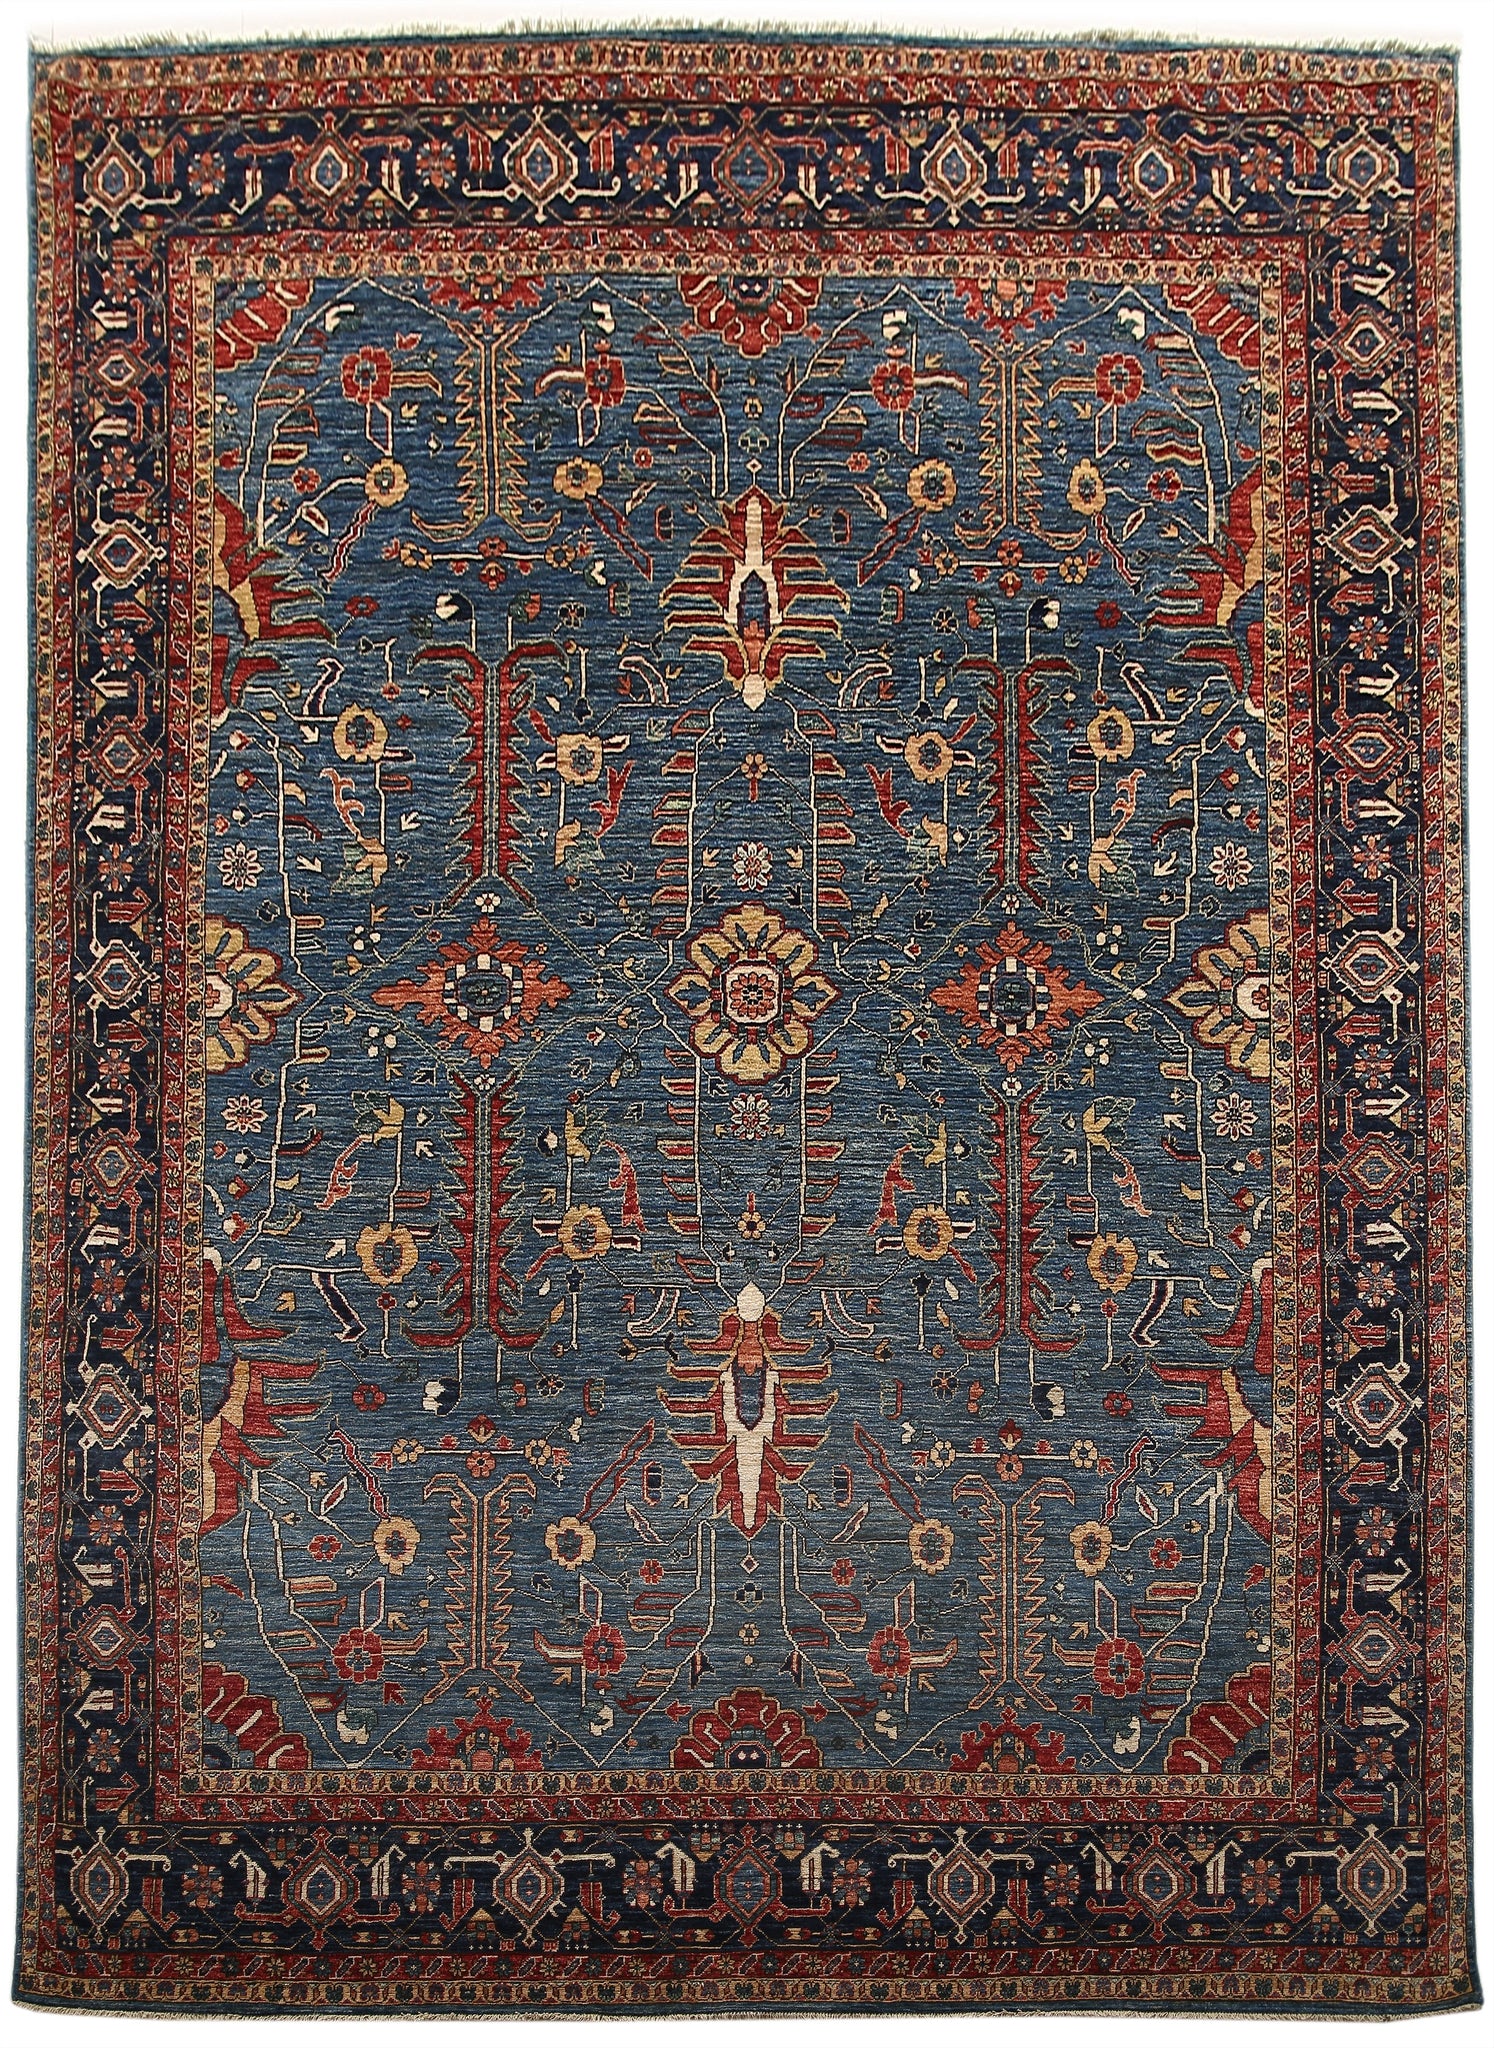 Sold at Auction: Hand Knotted Afghan Rug 2.5x4.5 ft #4687